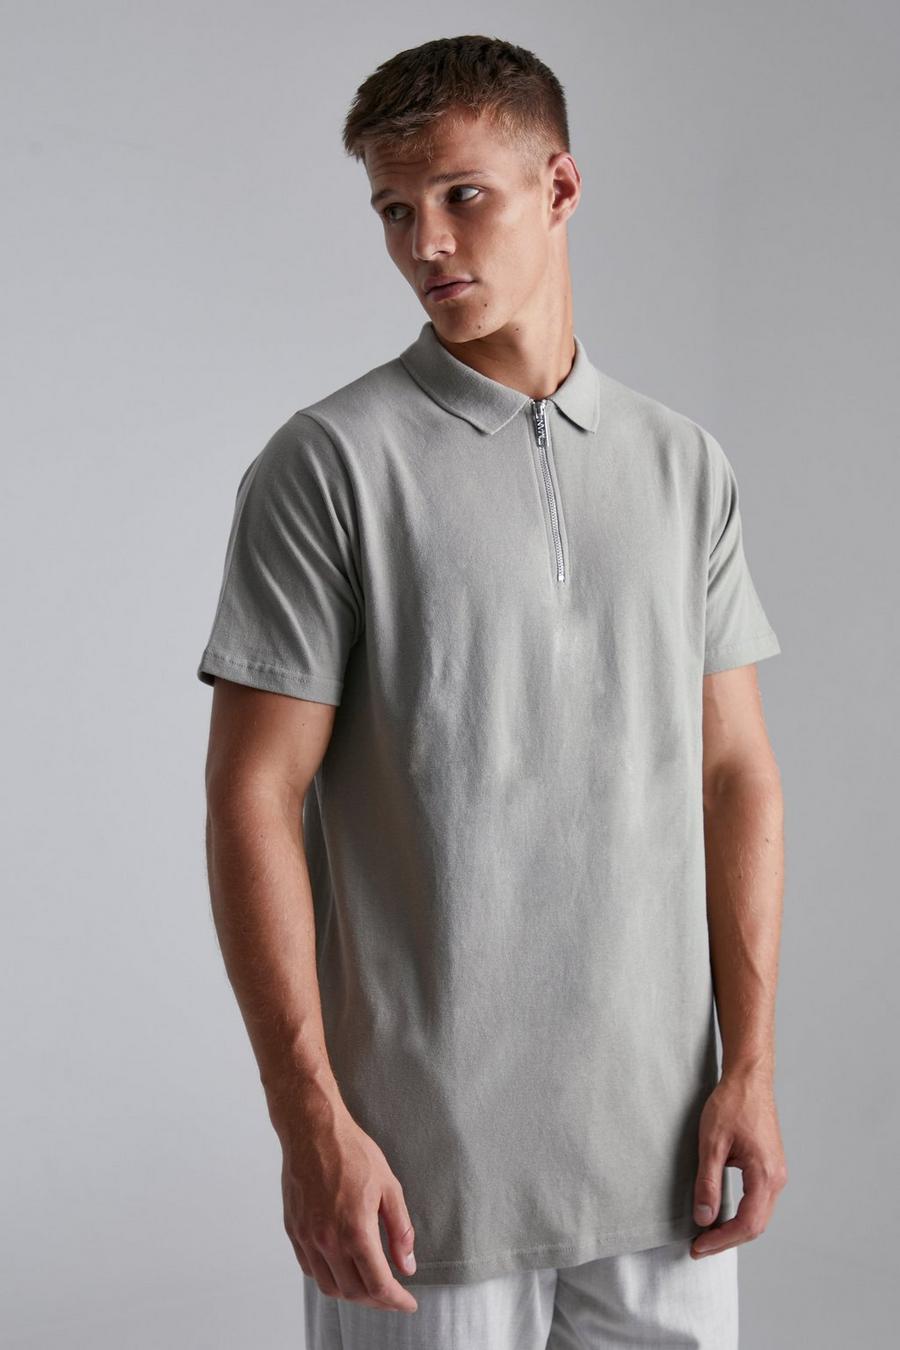 Sage green Tall Slim Fit Short Sleeve Zip Polo